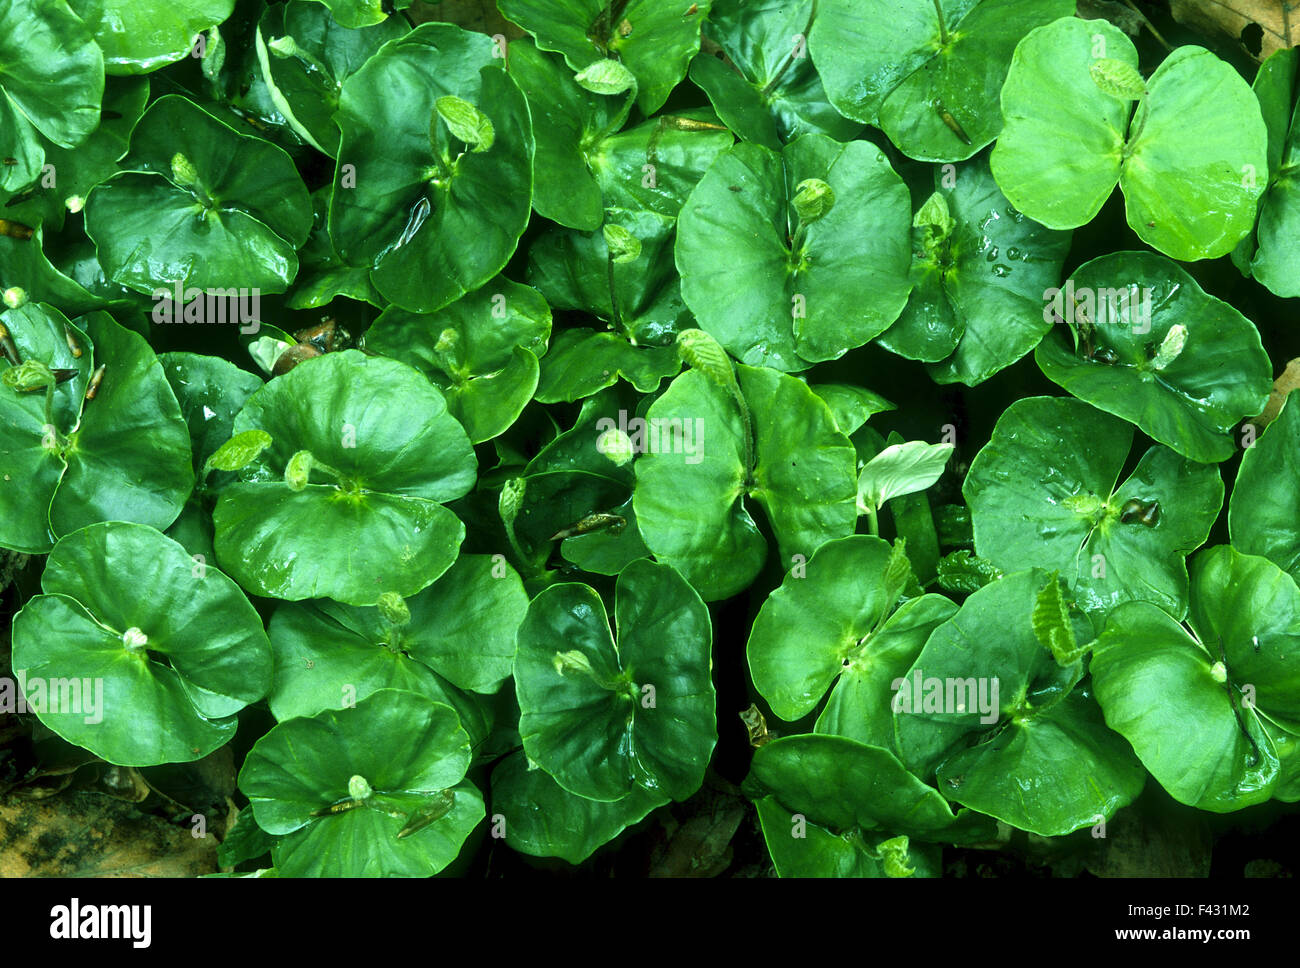 germinate; sprout; beech; tree; Stock Photo